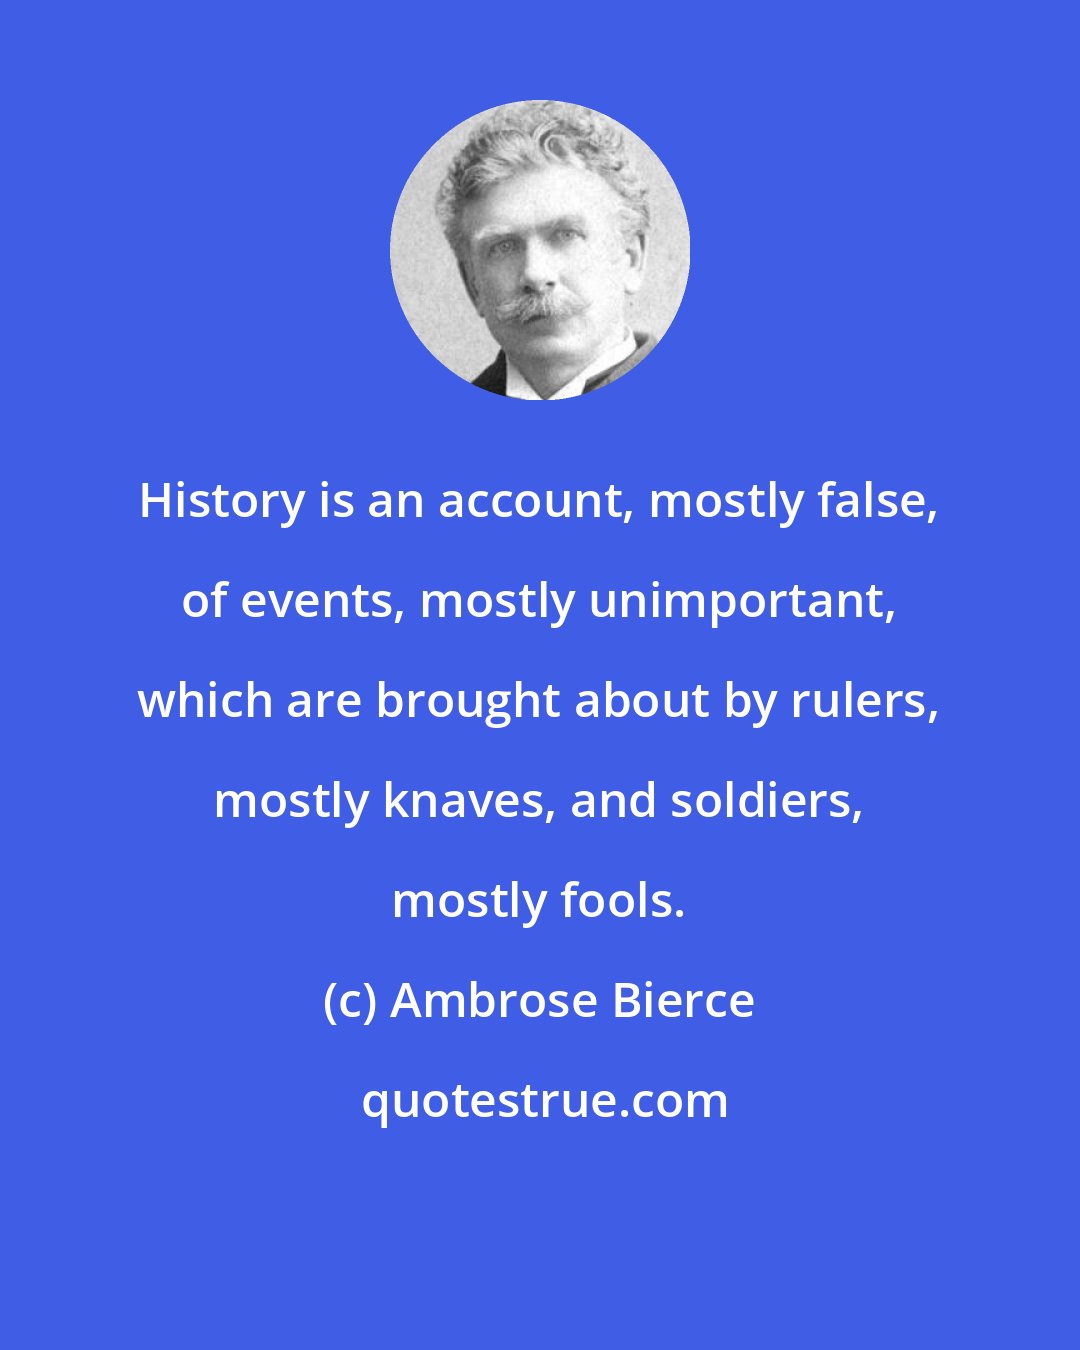 Ambrose Bierce: History is an account, mostly false, of events, mostly unimportant, which are brought about by rulers, mostly knaves, and soldiers, mostly fools.